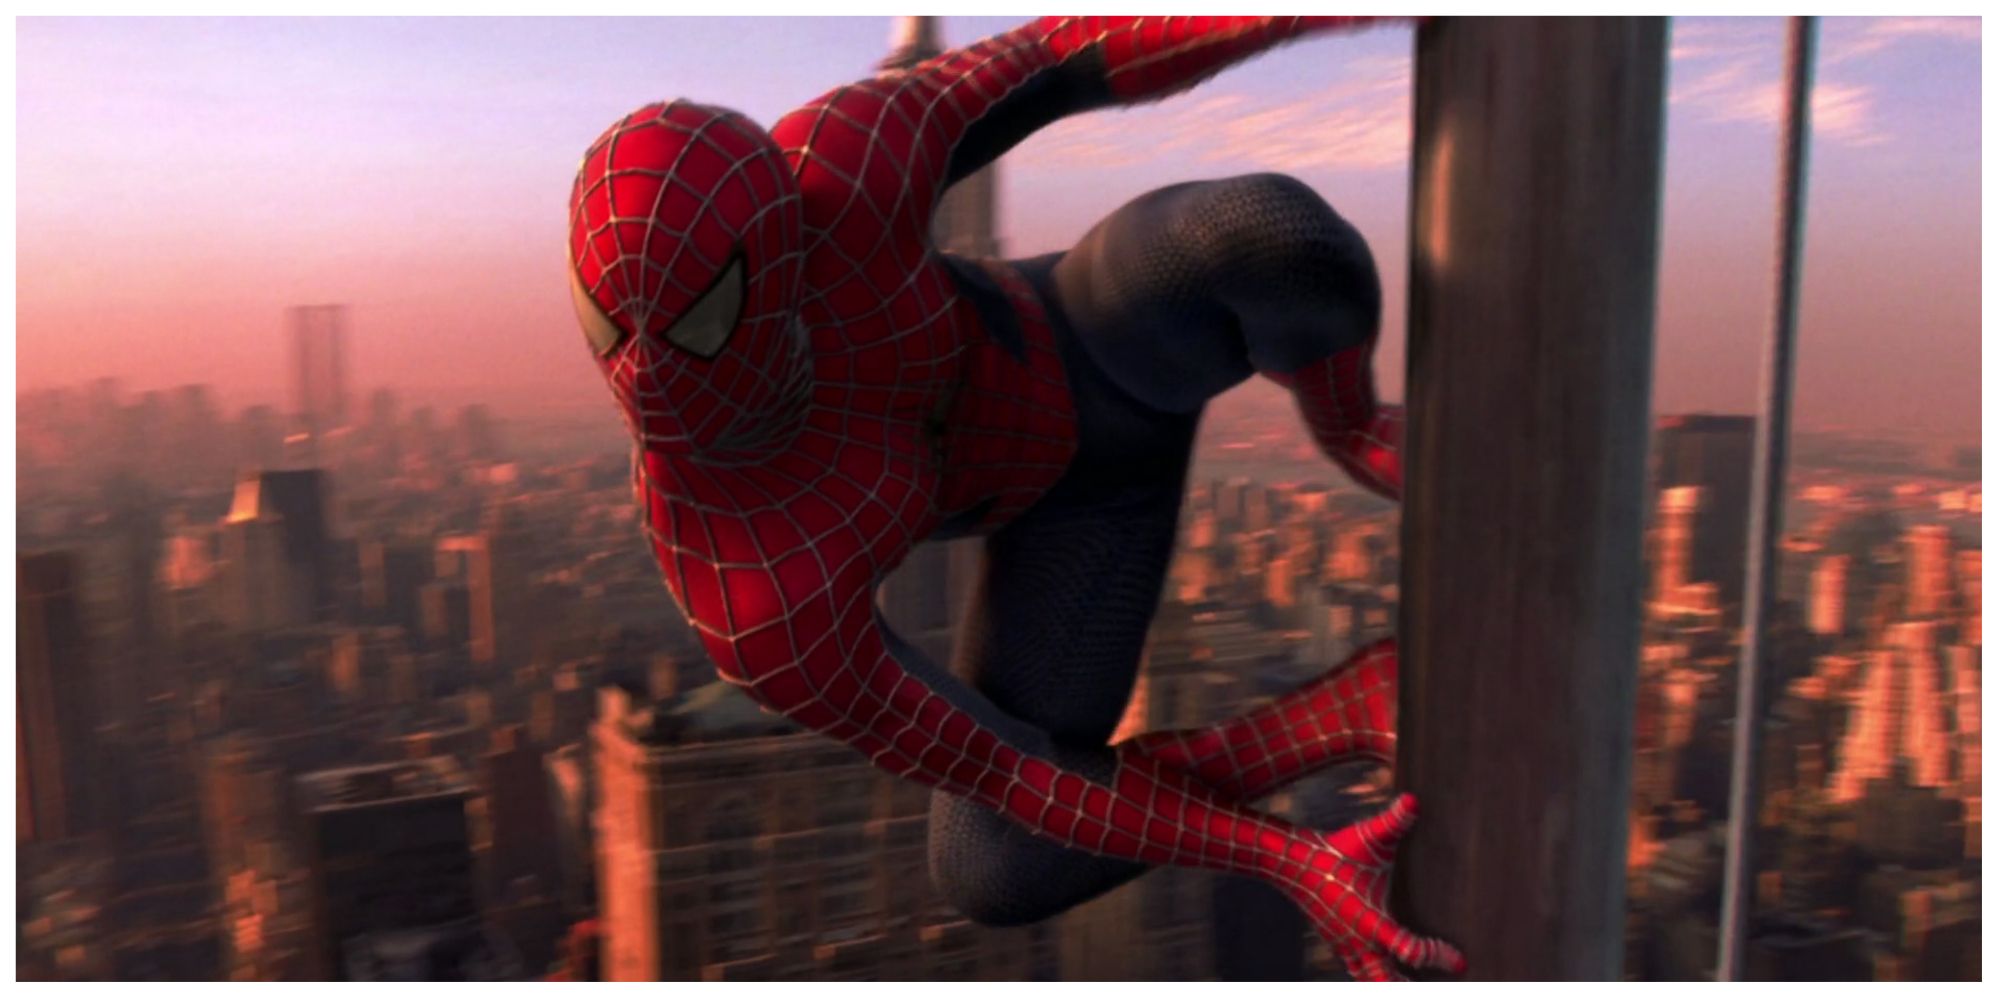 Spider-Man swinging from buildings in Spider-Man (2002)